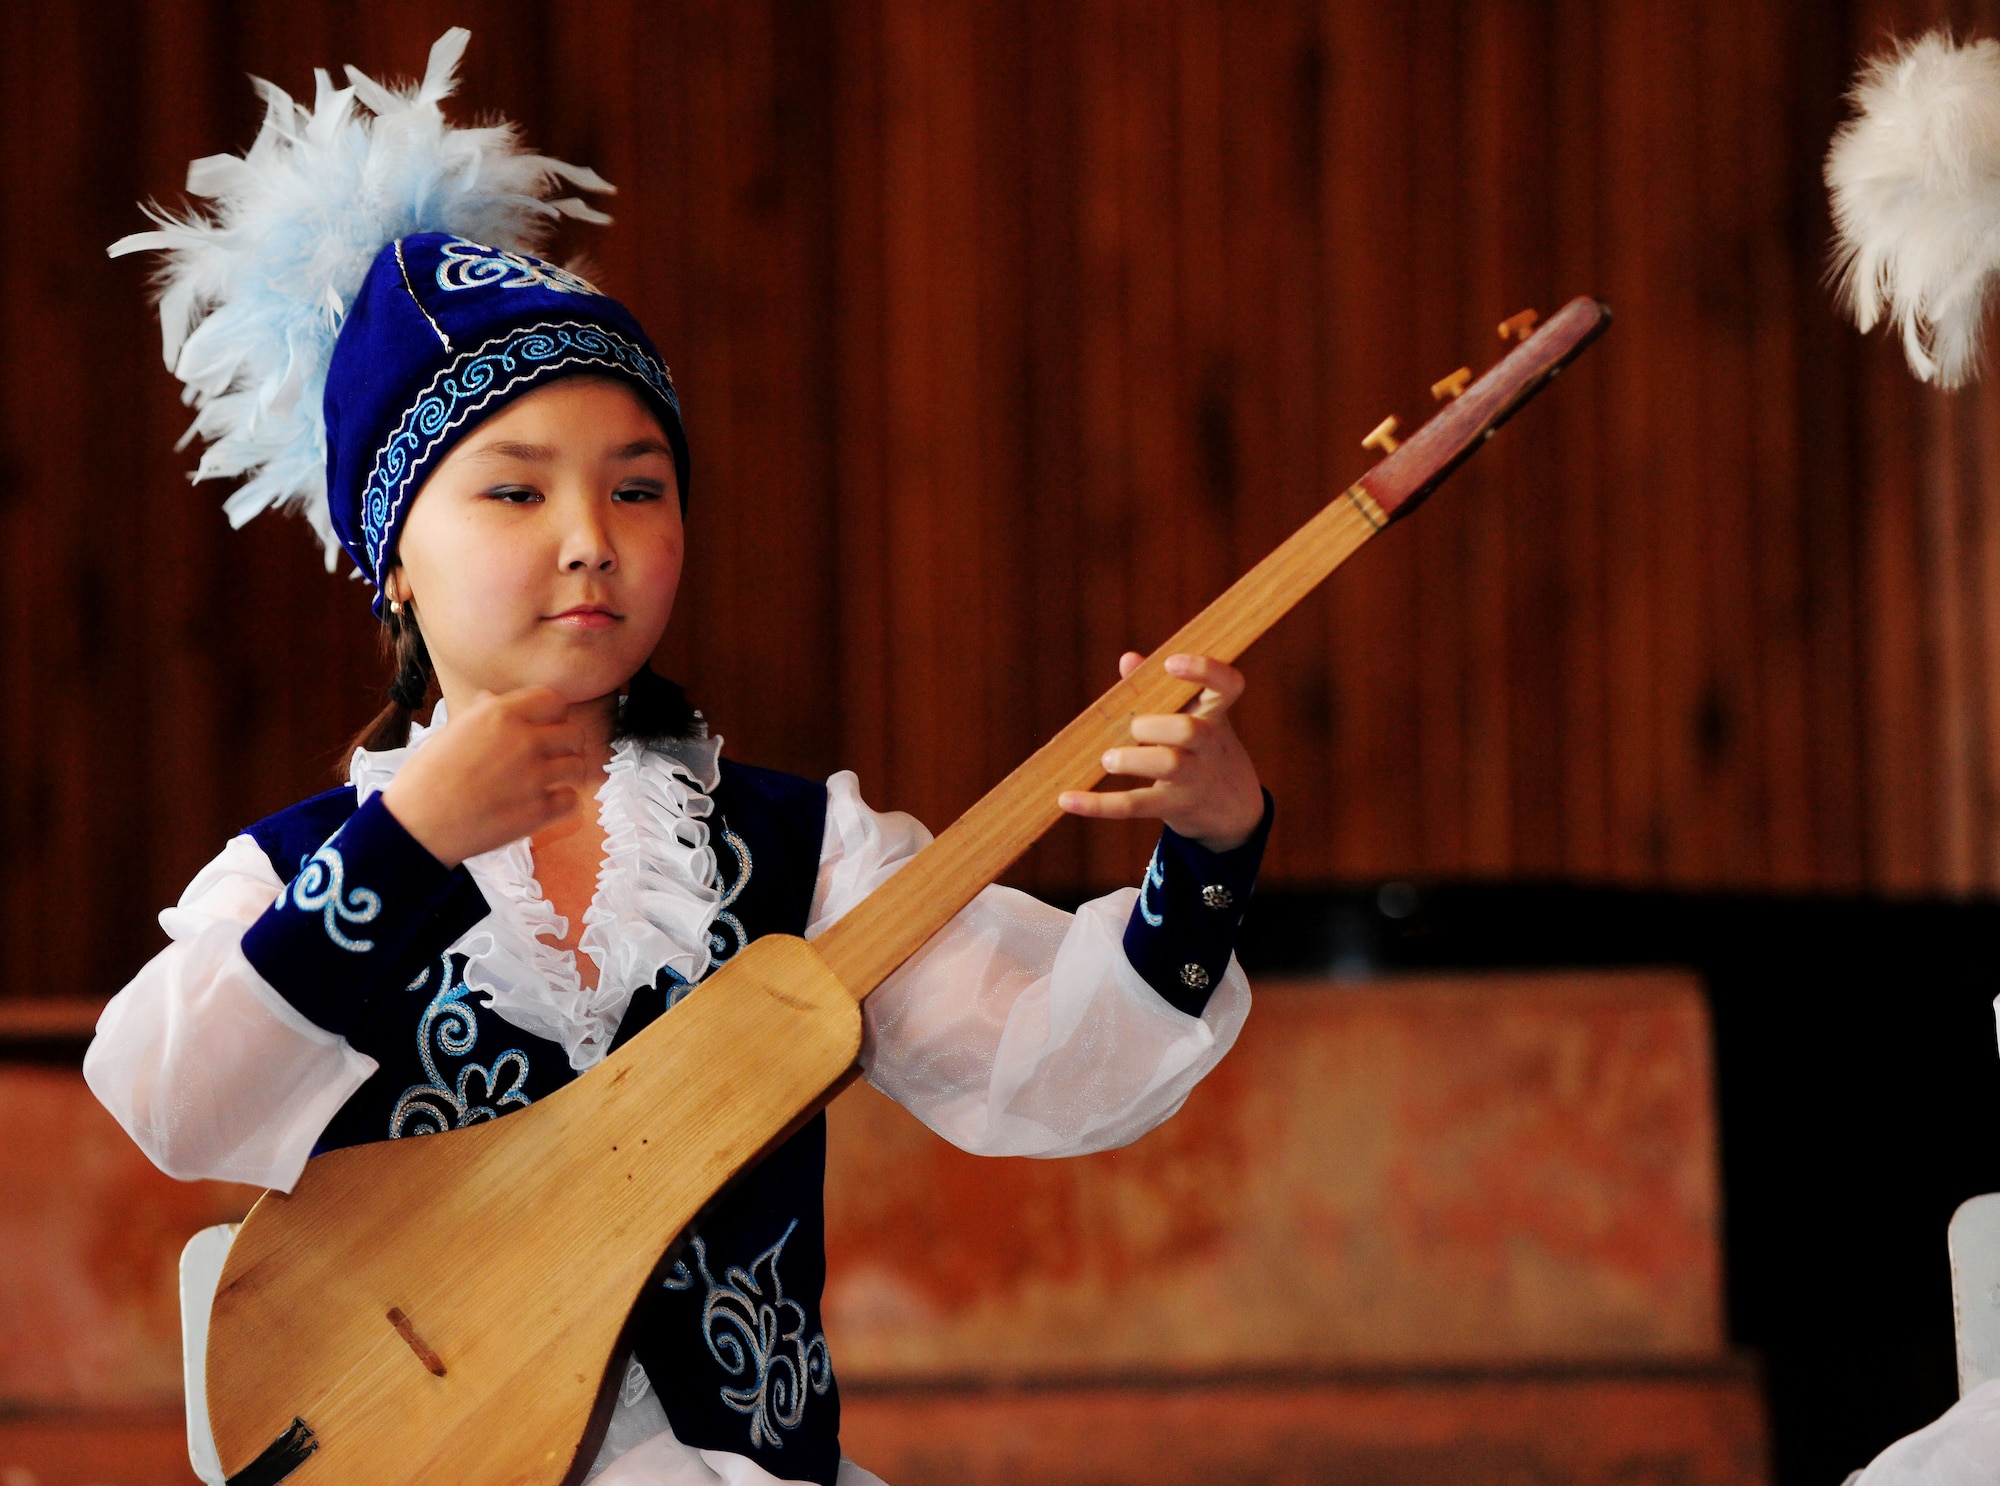 A young girl plays the Komuz, a Kyrgyz traditional instrument, for the Washington Redskins cheerleaders at the Abdraev Musical Boarding School in Bishkek, Kyrgyzstan, Jan. 27, 2010. The Cheerleaders are on tour sponsored by the Armed Forces Entertainment. The Transit Center at Manas is their first stop in a two-week long tour where they will perform for Airmen, Soldiers, Sailors and Marines deployed overseas. (U.S. Air Force photo/Senior Airman Nichelle Anderson/Released)